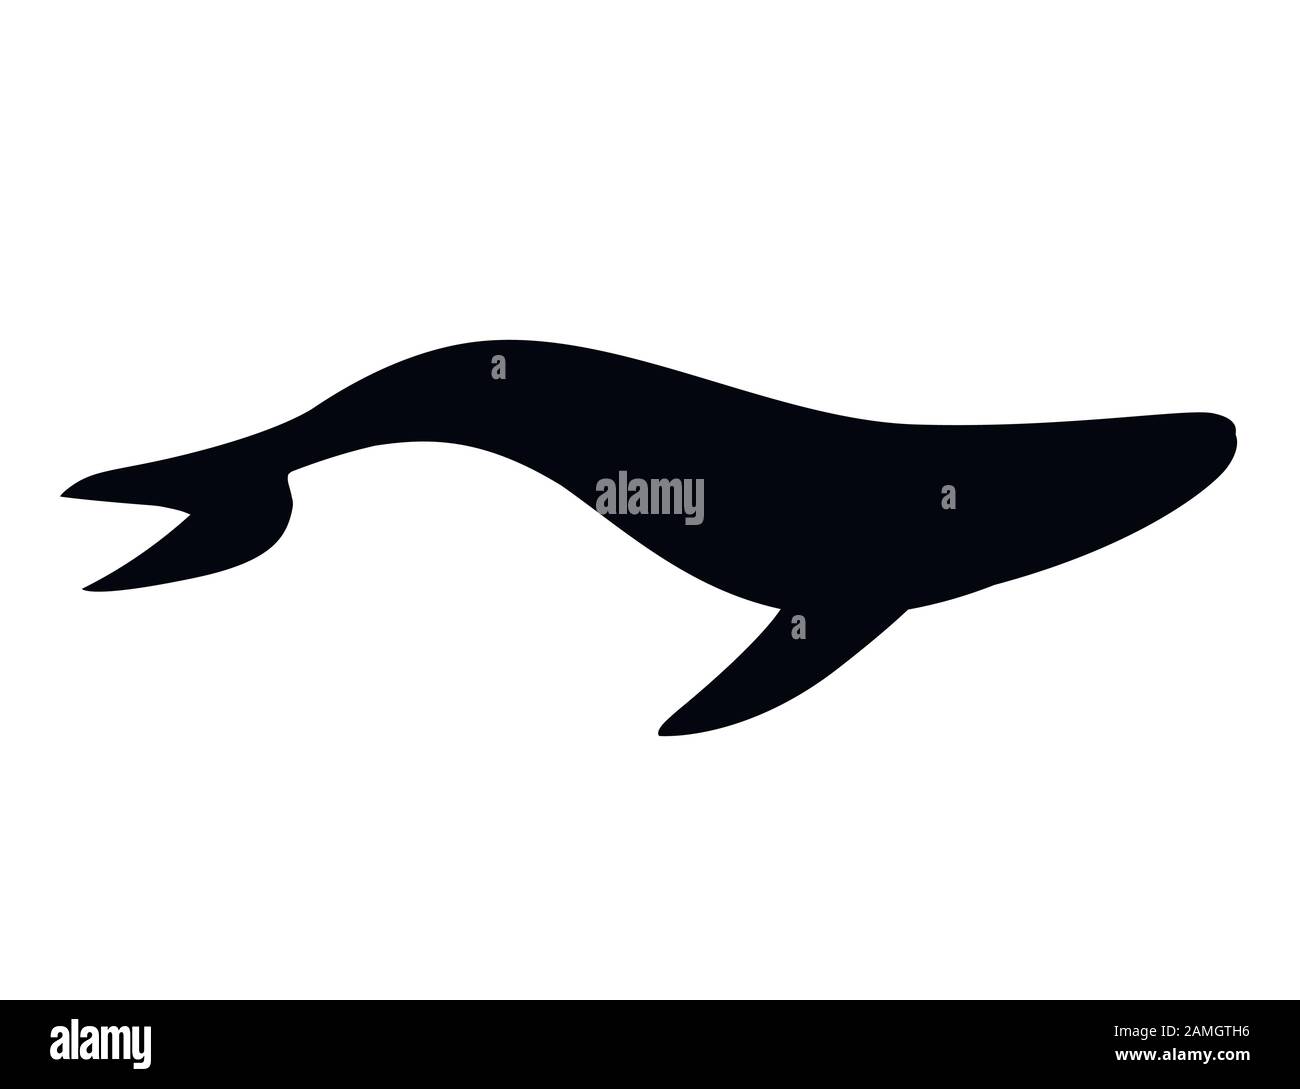 Black silhouette big blue whale cartoon animal design biggest mammal on the earth flat vector illustration isolated on white background. Stock Vector